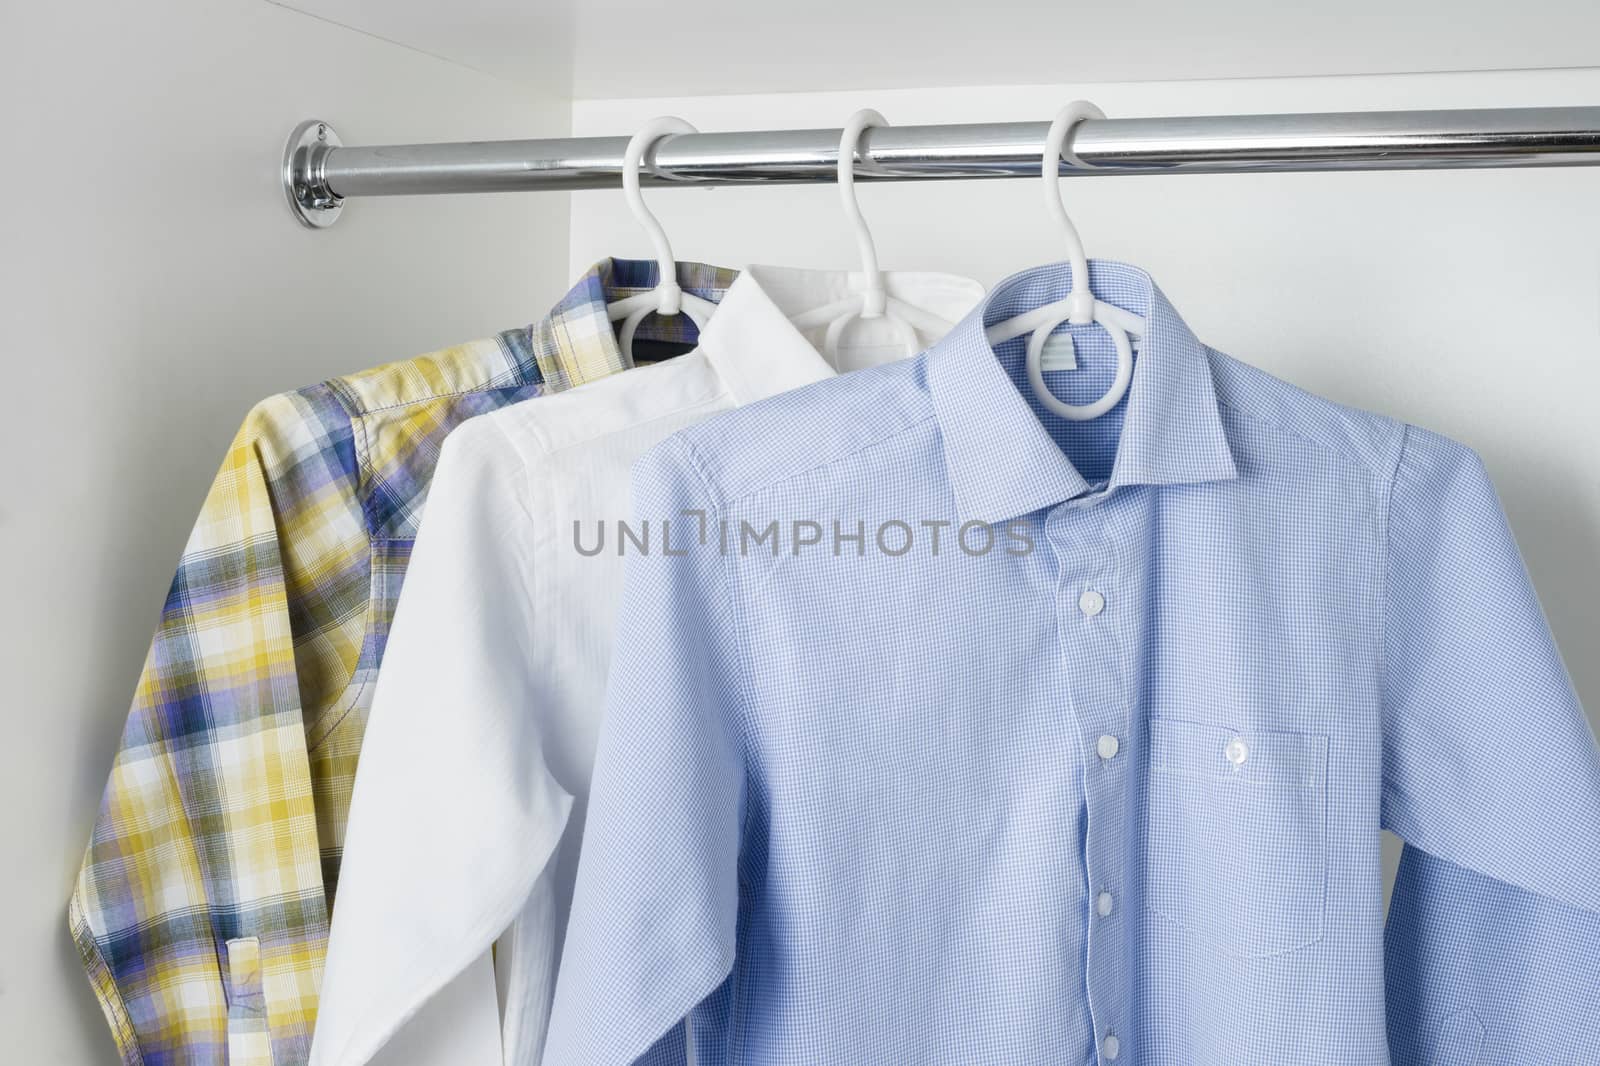 clean ironed men's shirts by iprachenko